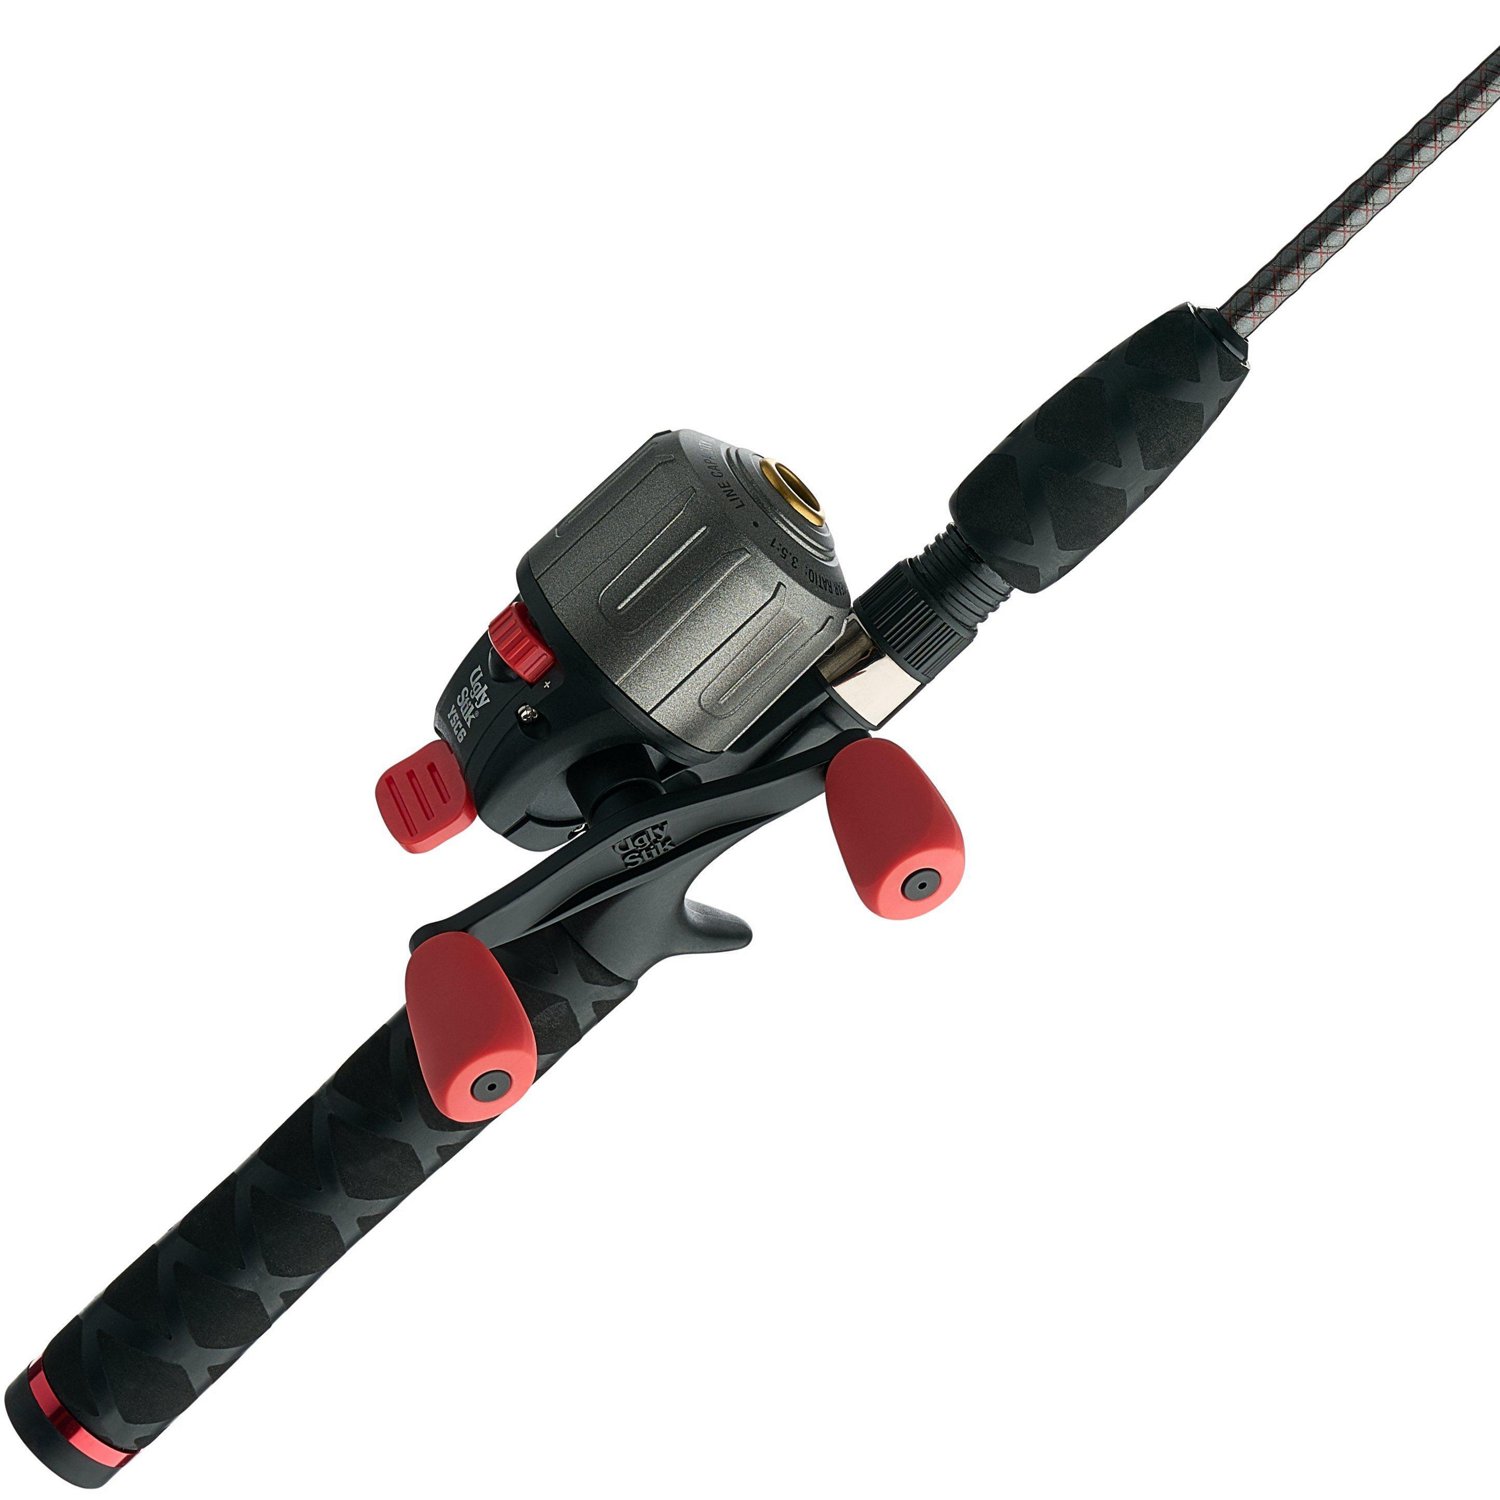 Lews Carbon Fire Spincast Rod & Reel Fishing Combo - sporting